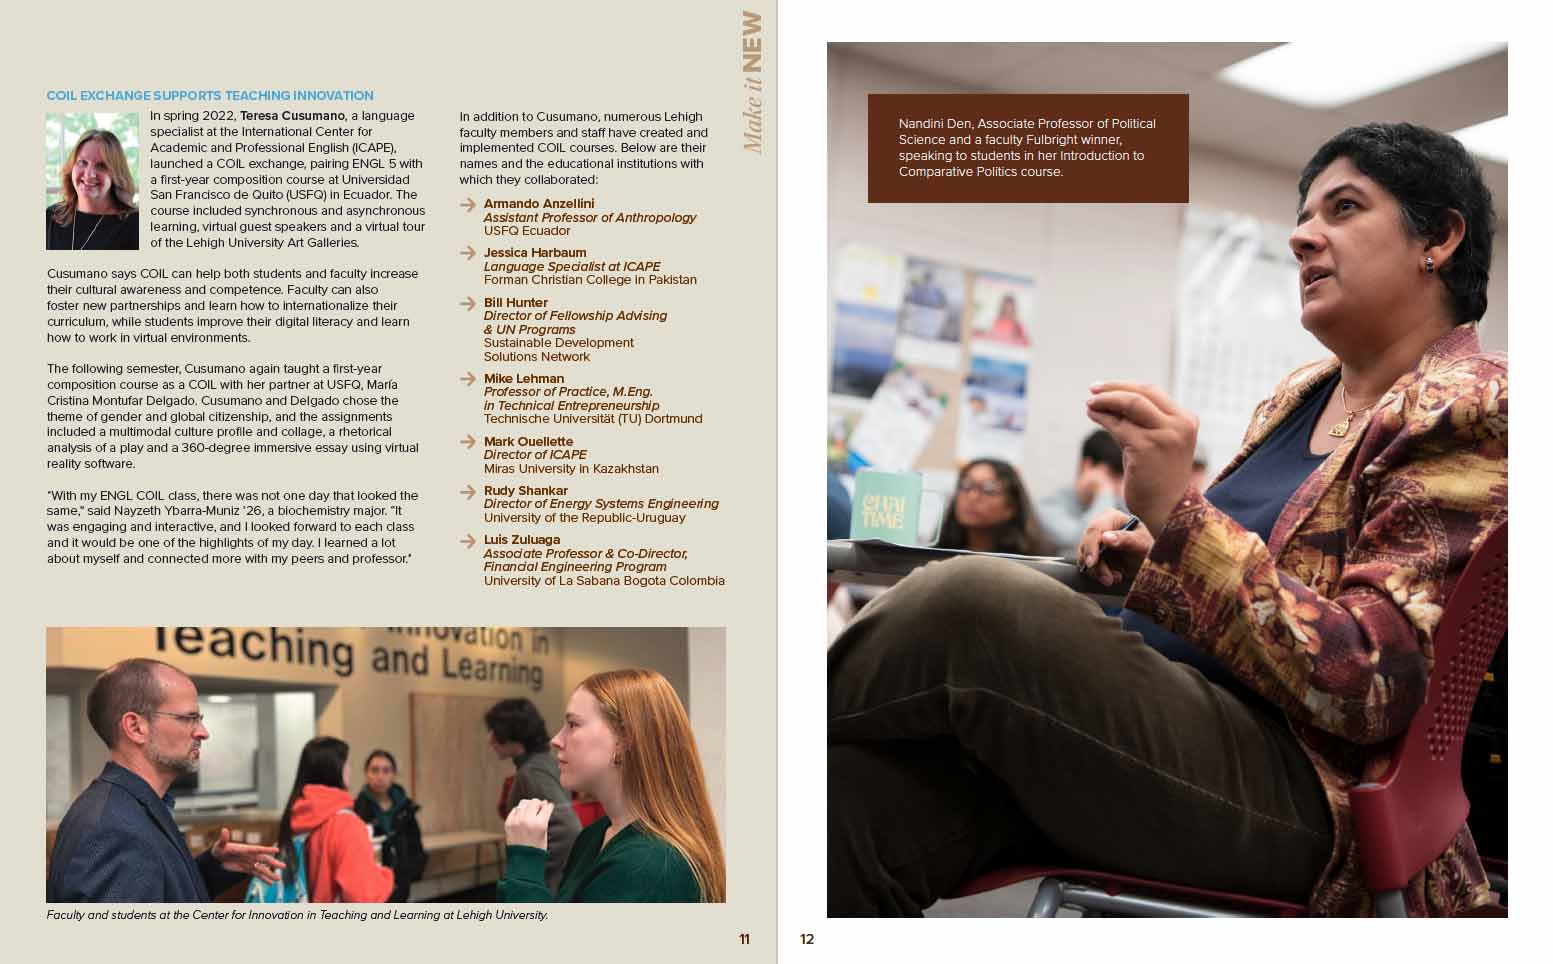 Sample pages from the 2023 Annual Report of Lehigh University's Office of International Affairs